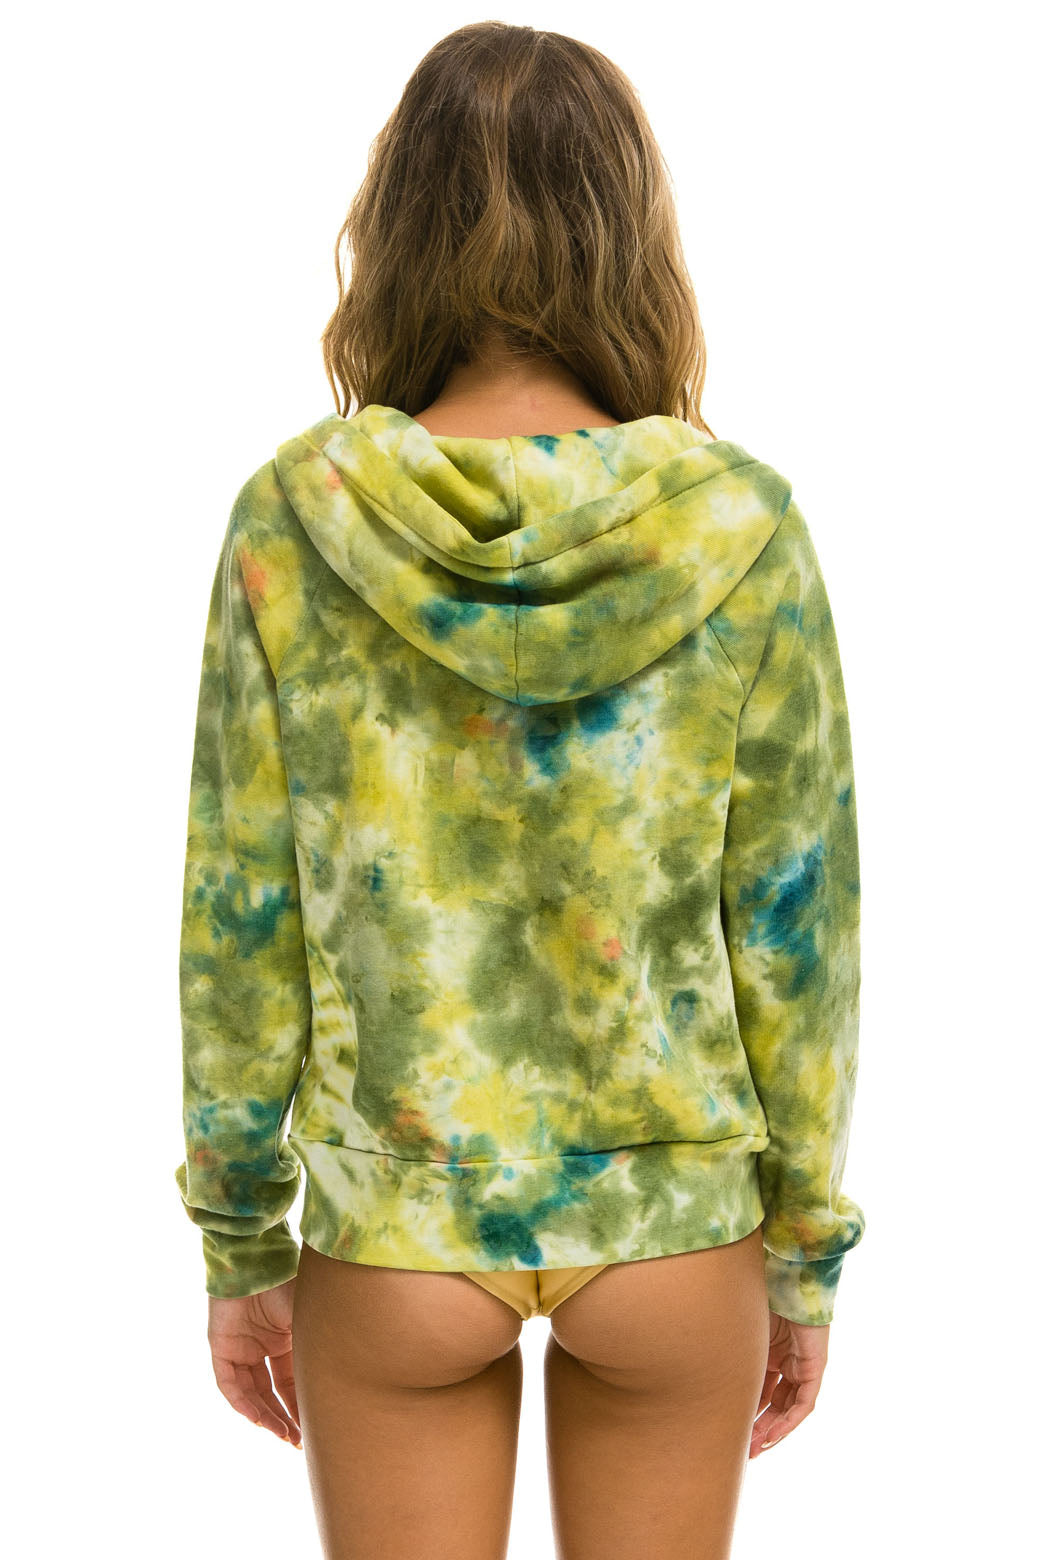 RELAXED HAND DYED ZIP HOODIE - TIE DYE GREEN YELLOW